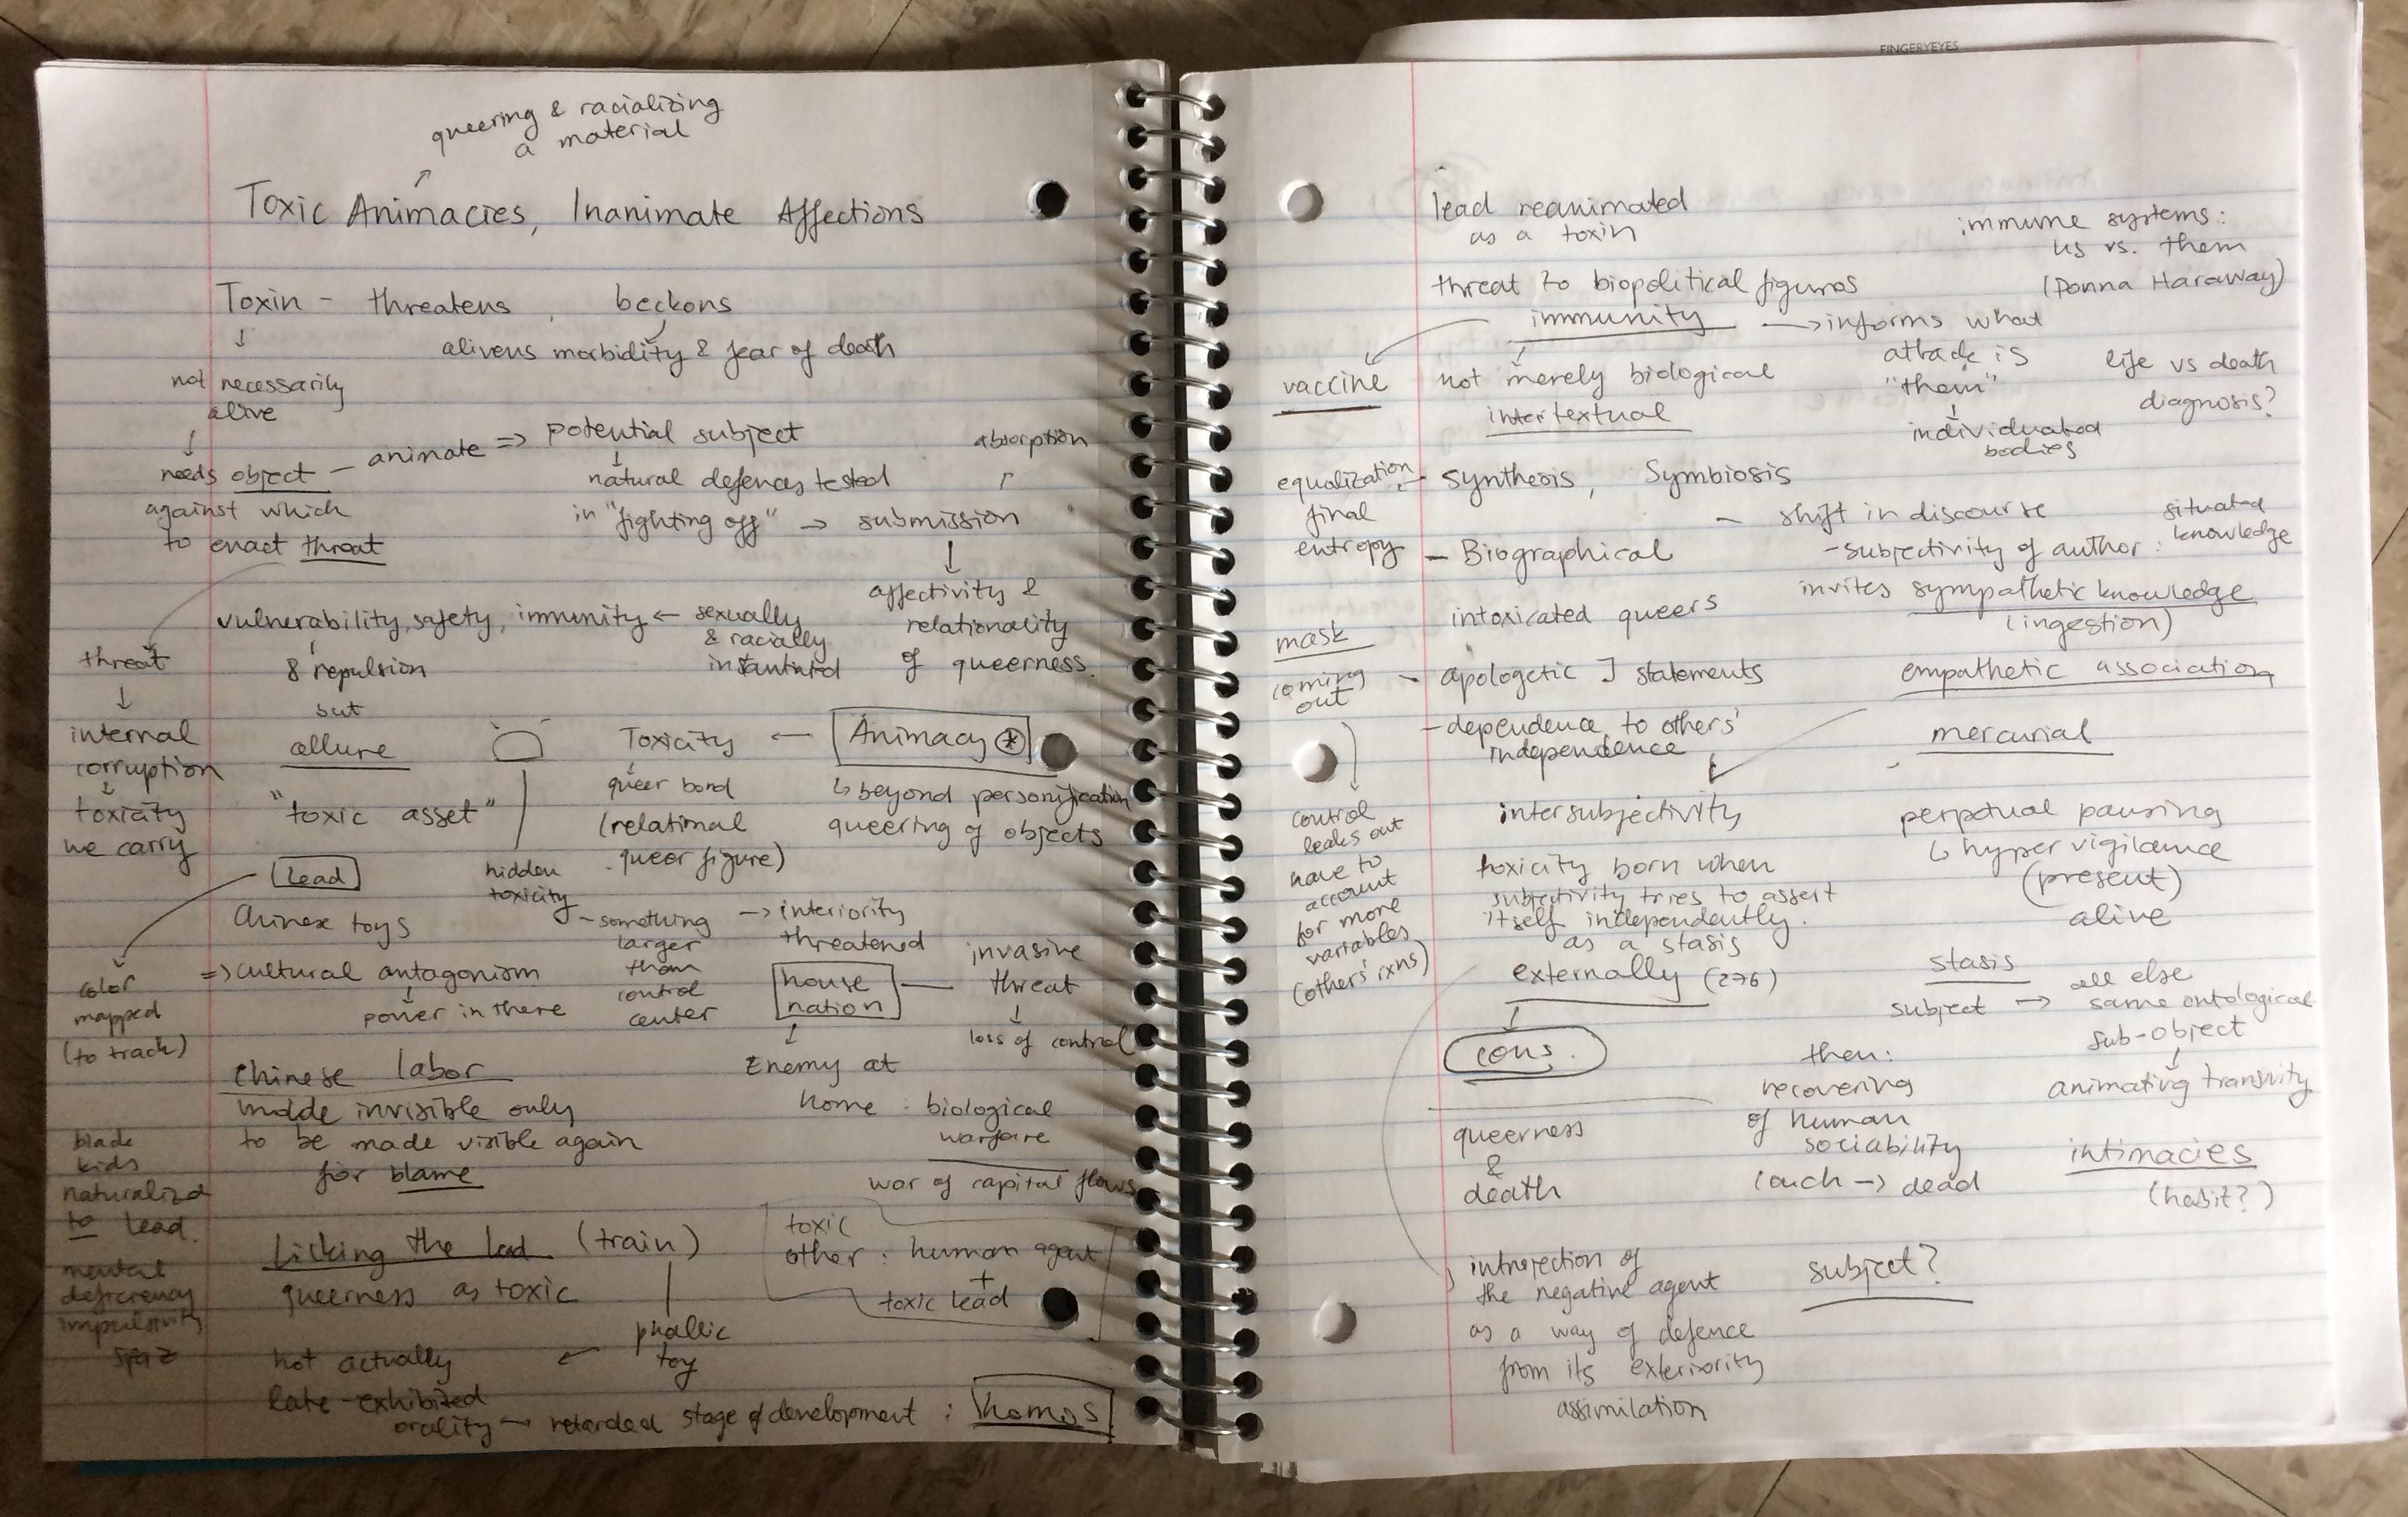 open spiral notebook with notes on toxic animacres and inanimate affections